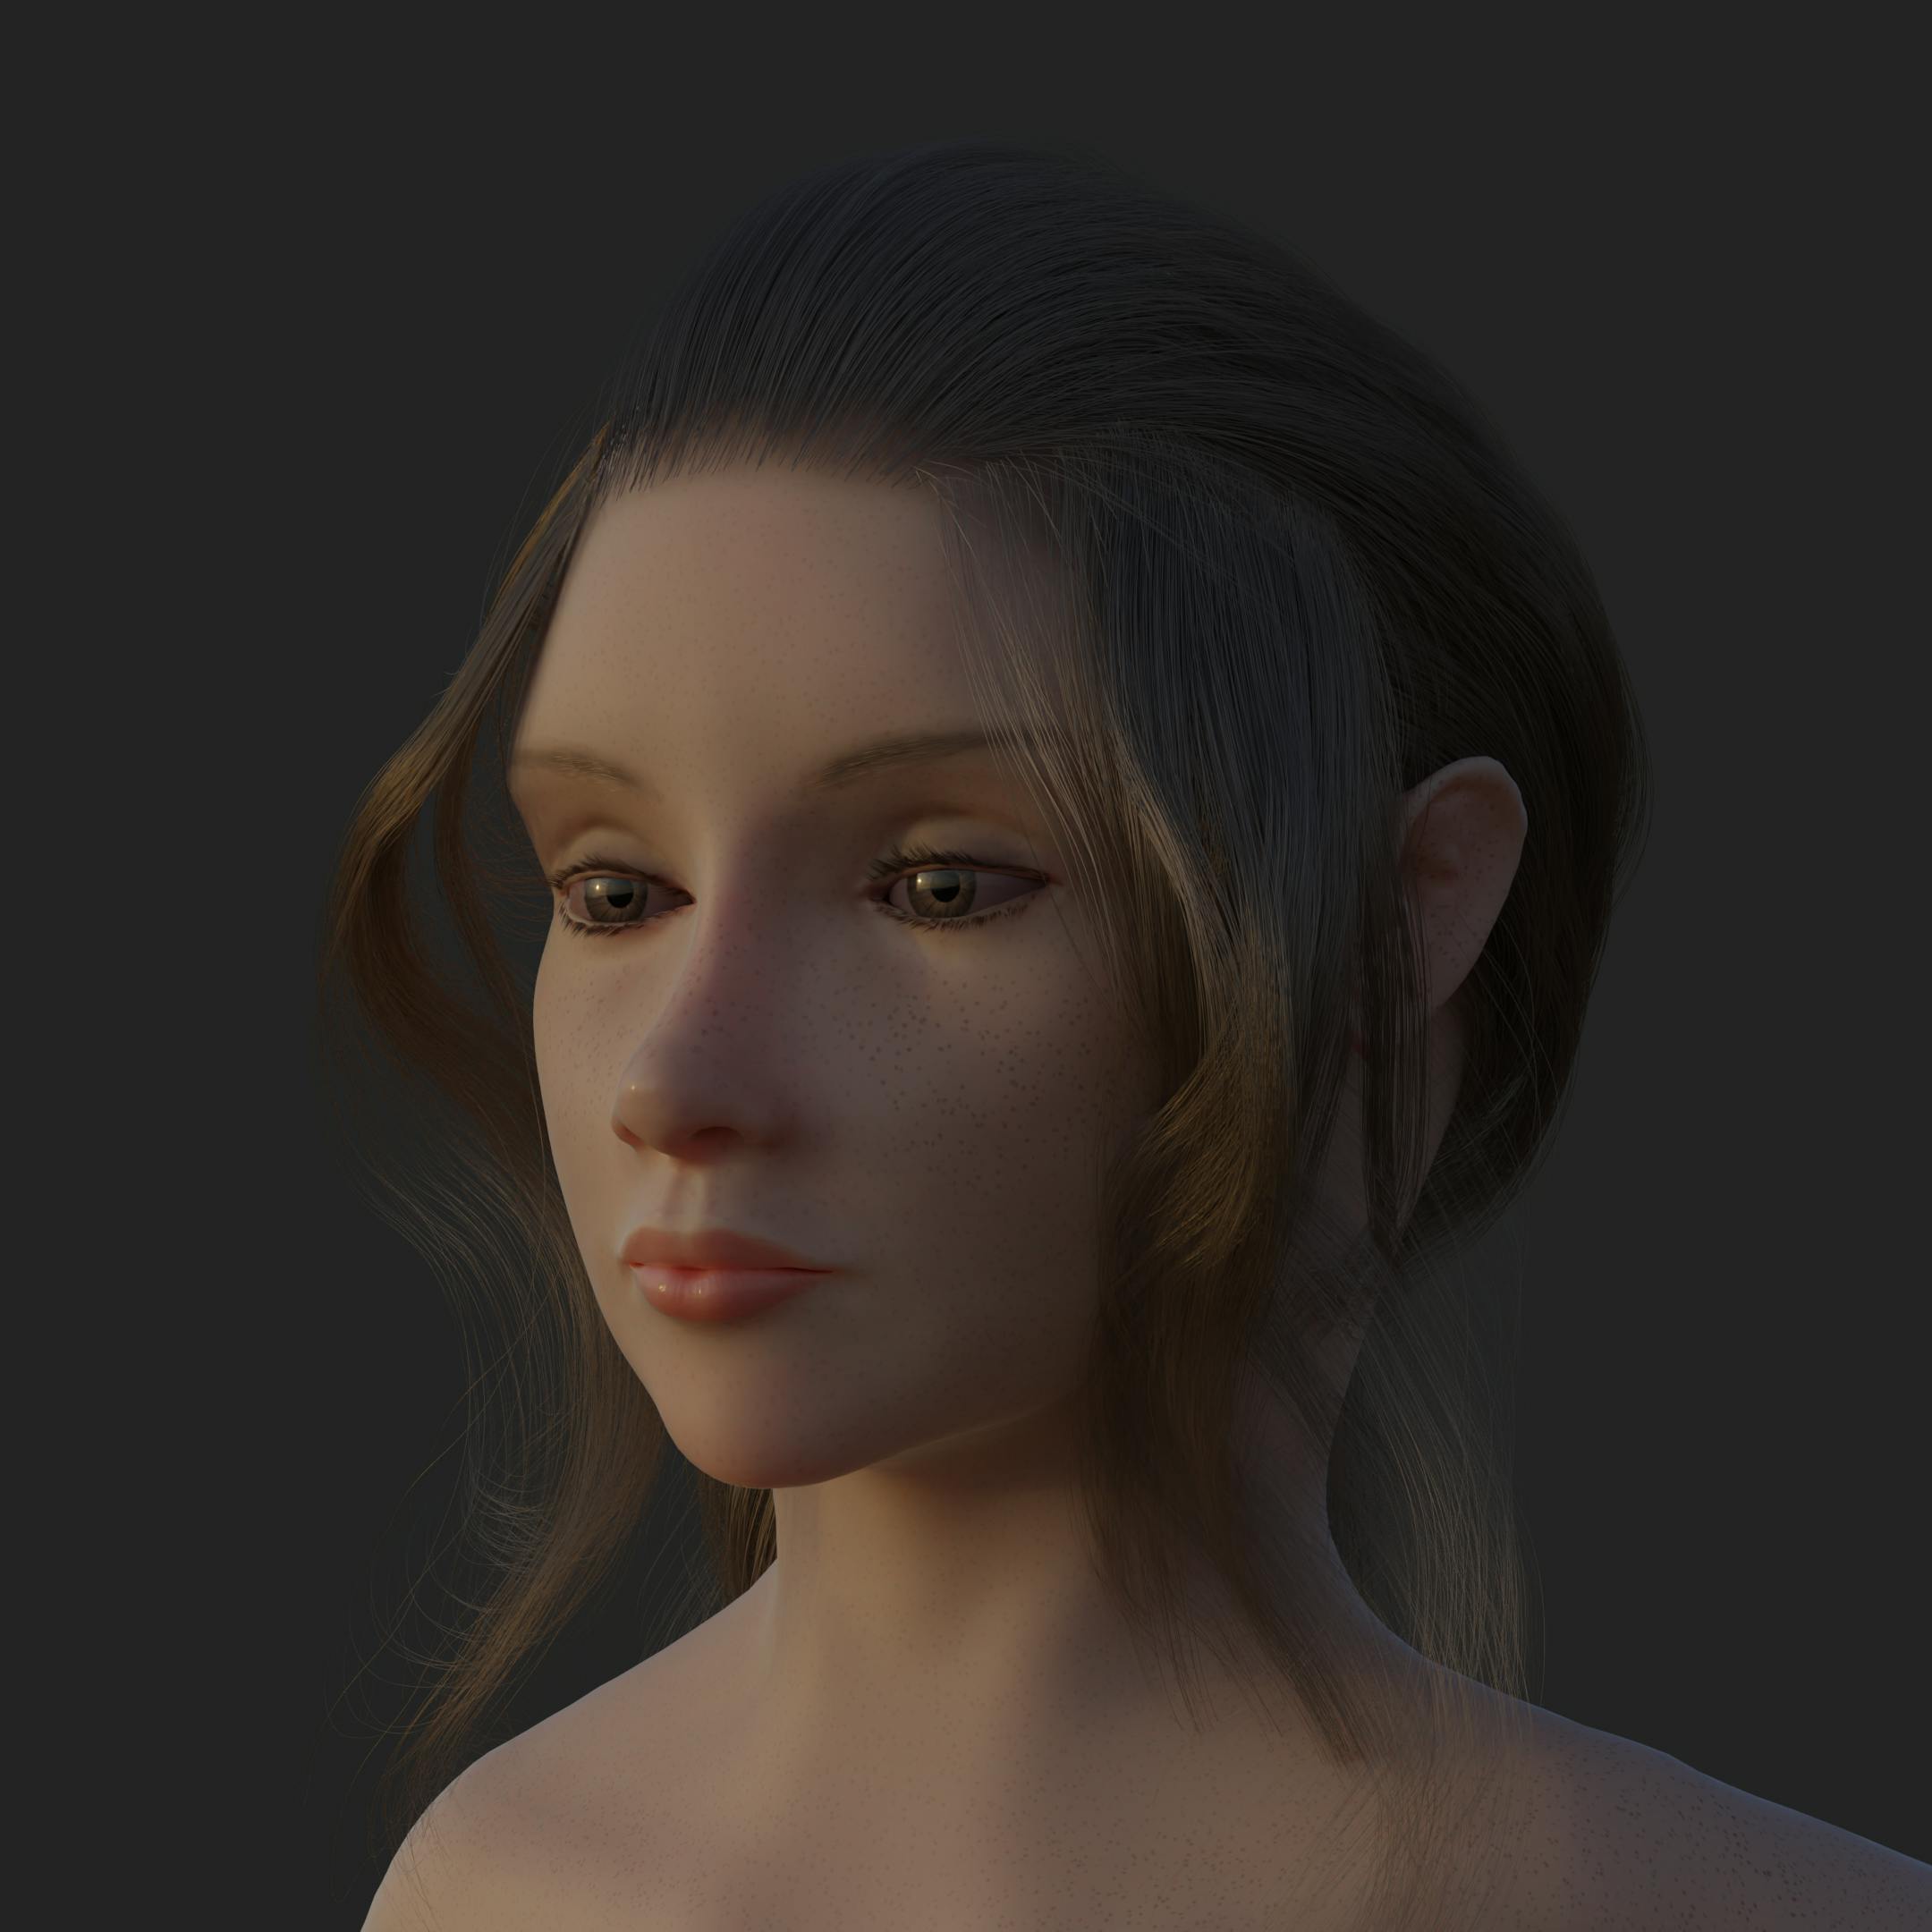 Render shot of a character model. The model is of a girl with brown hair and brown eyes